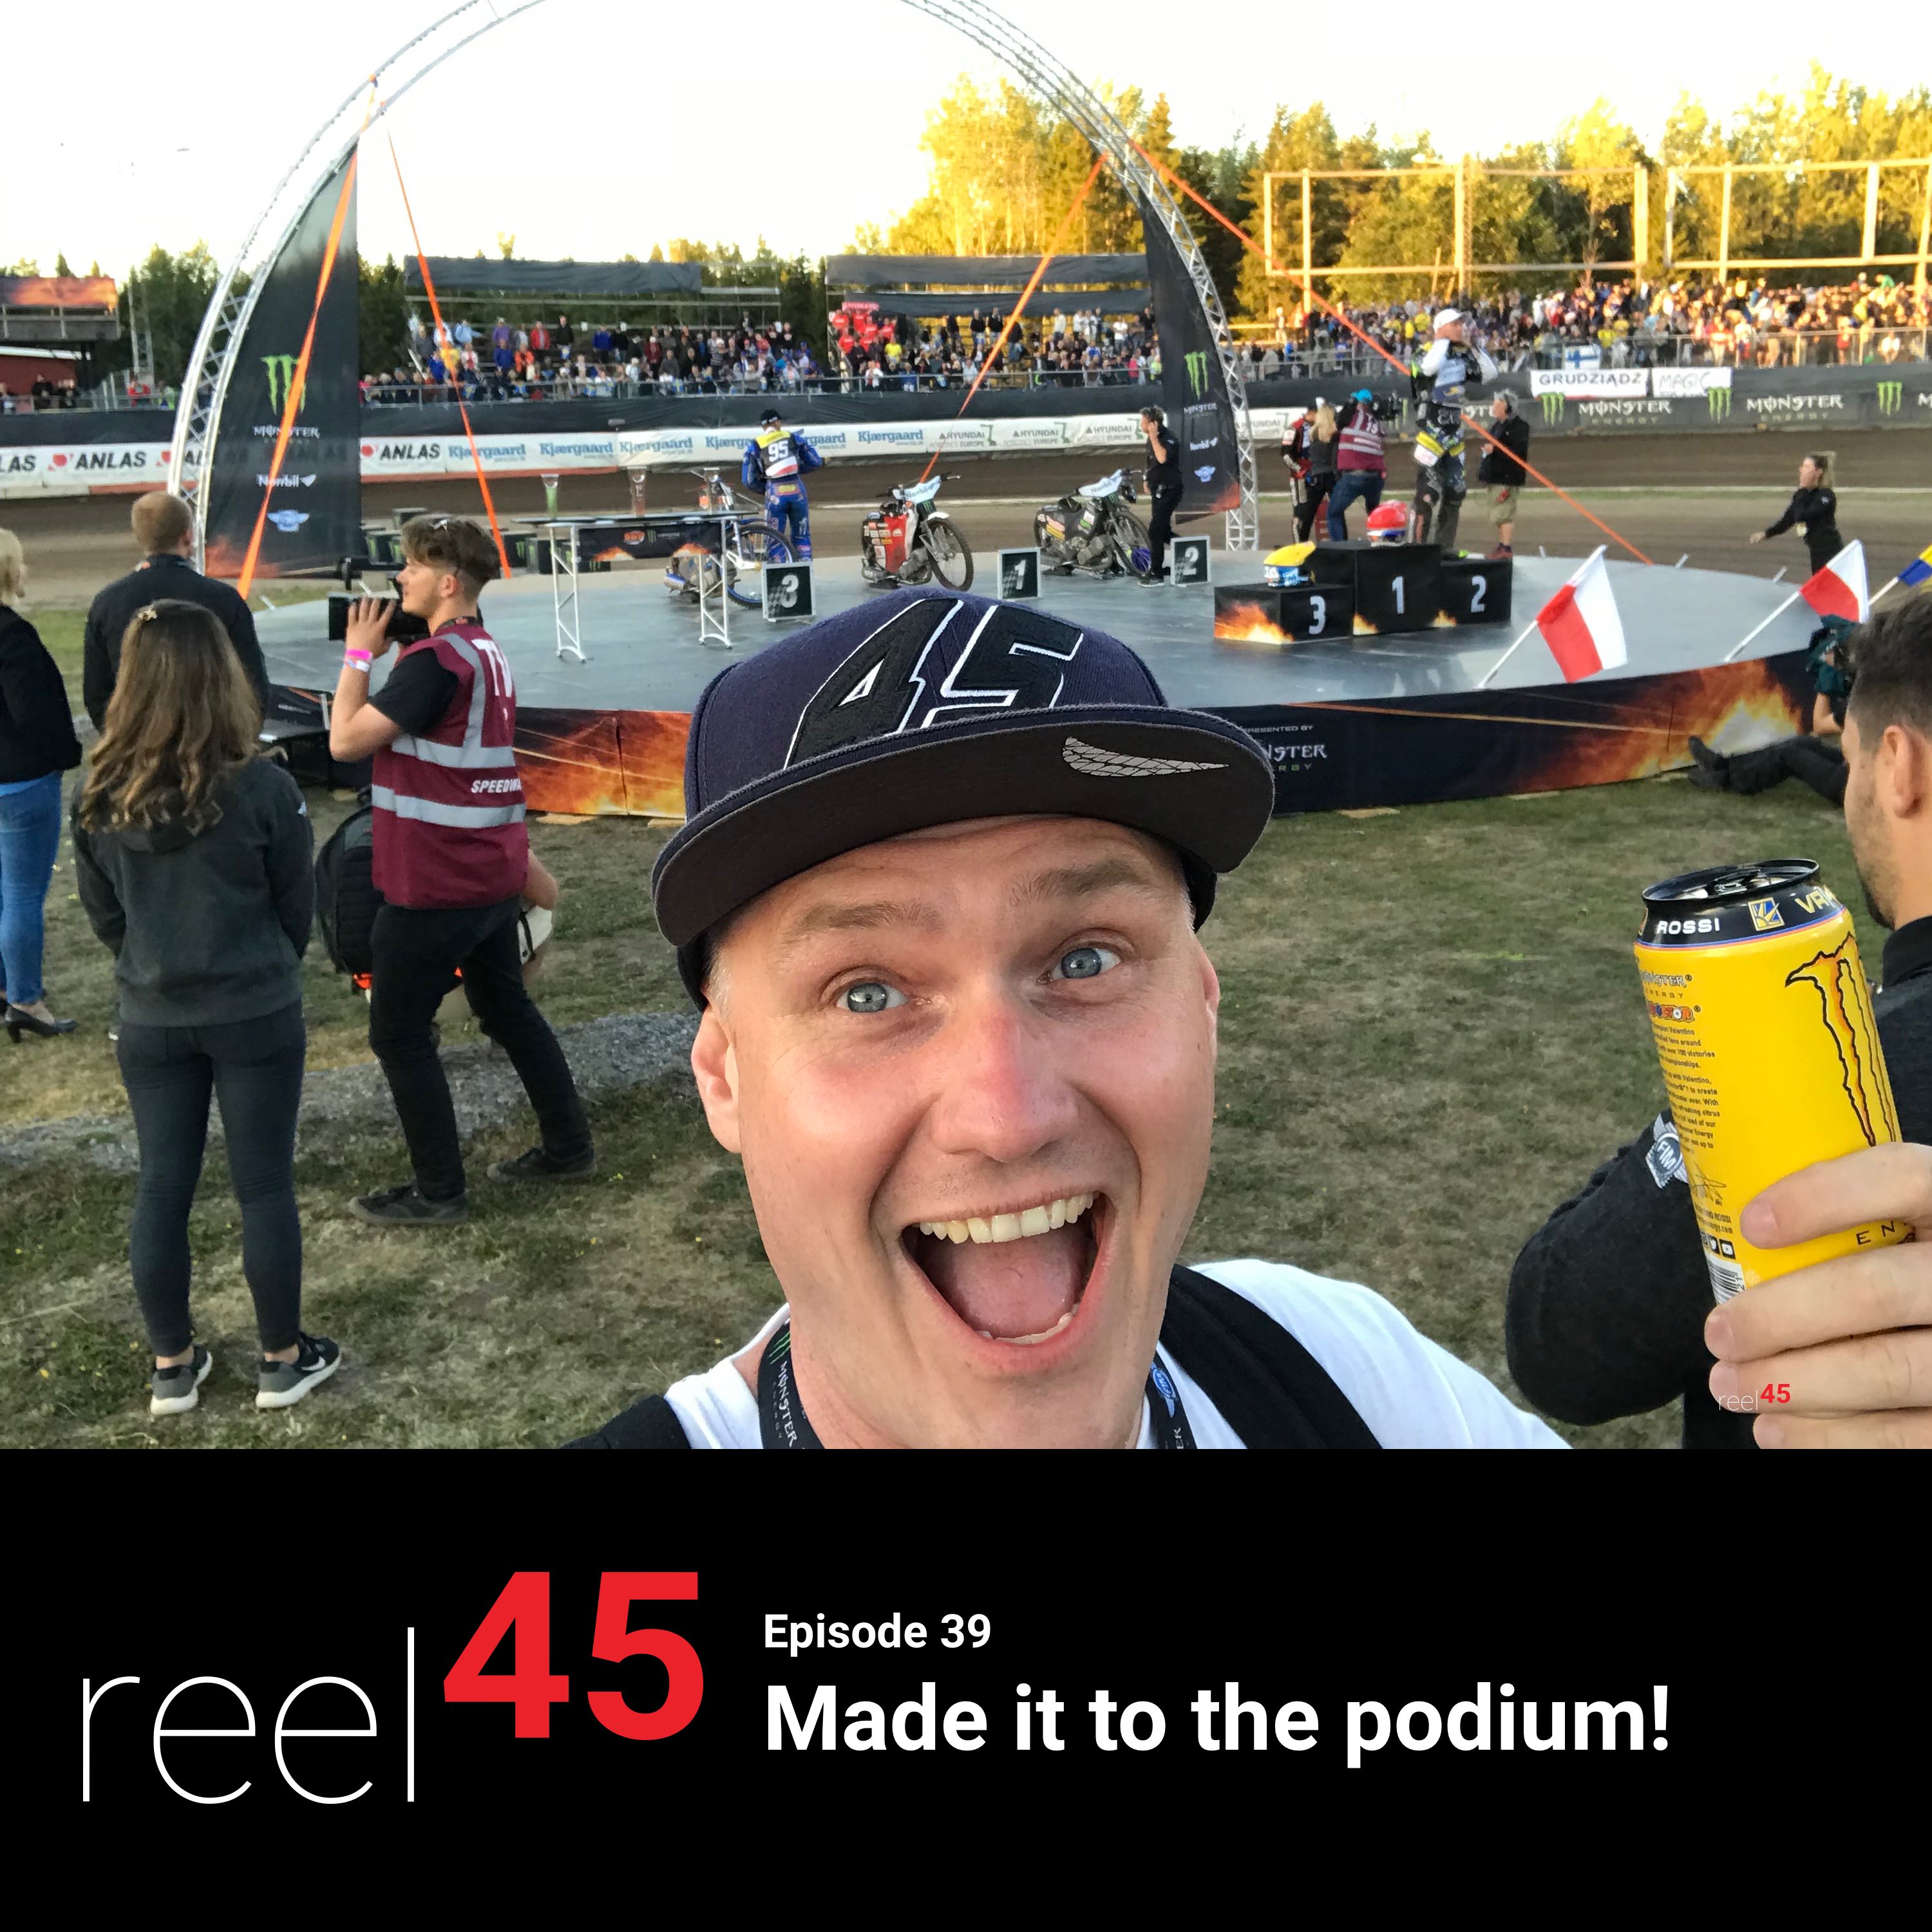 Episode 39 - I made it to the podium!